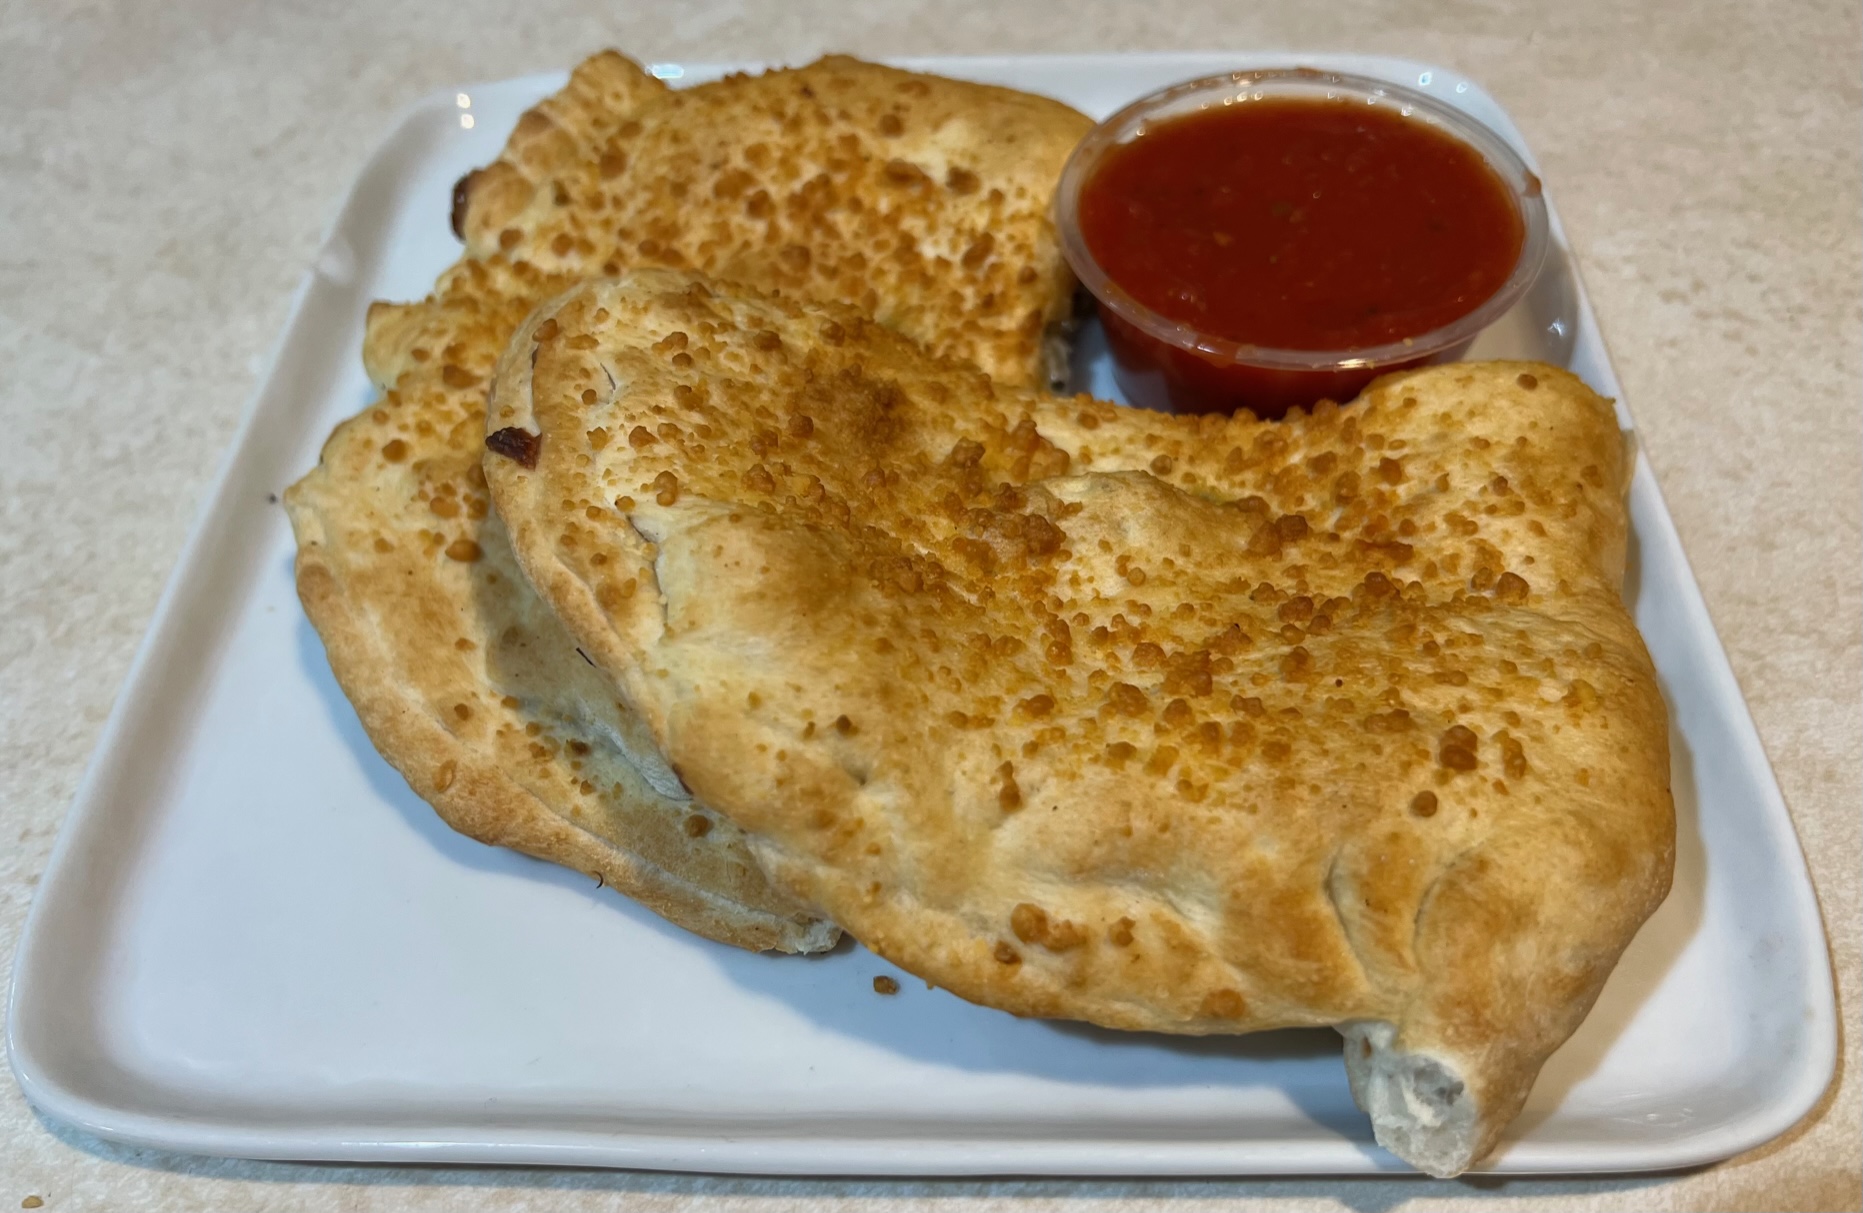 Two halves of a calzone sit on a square white plate. There is a small cup of marinara sauce next to them.